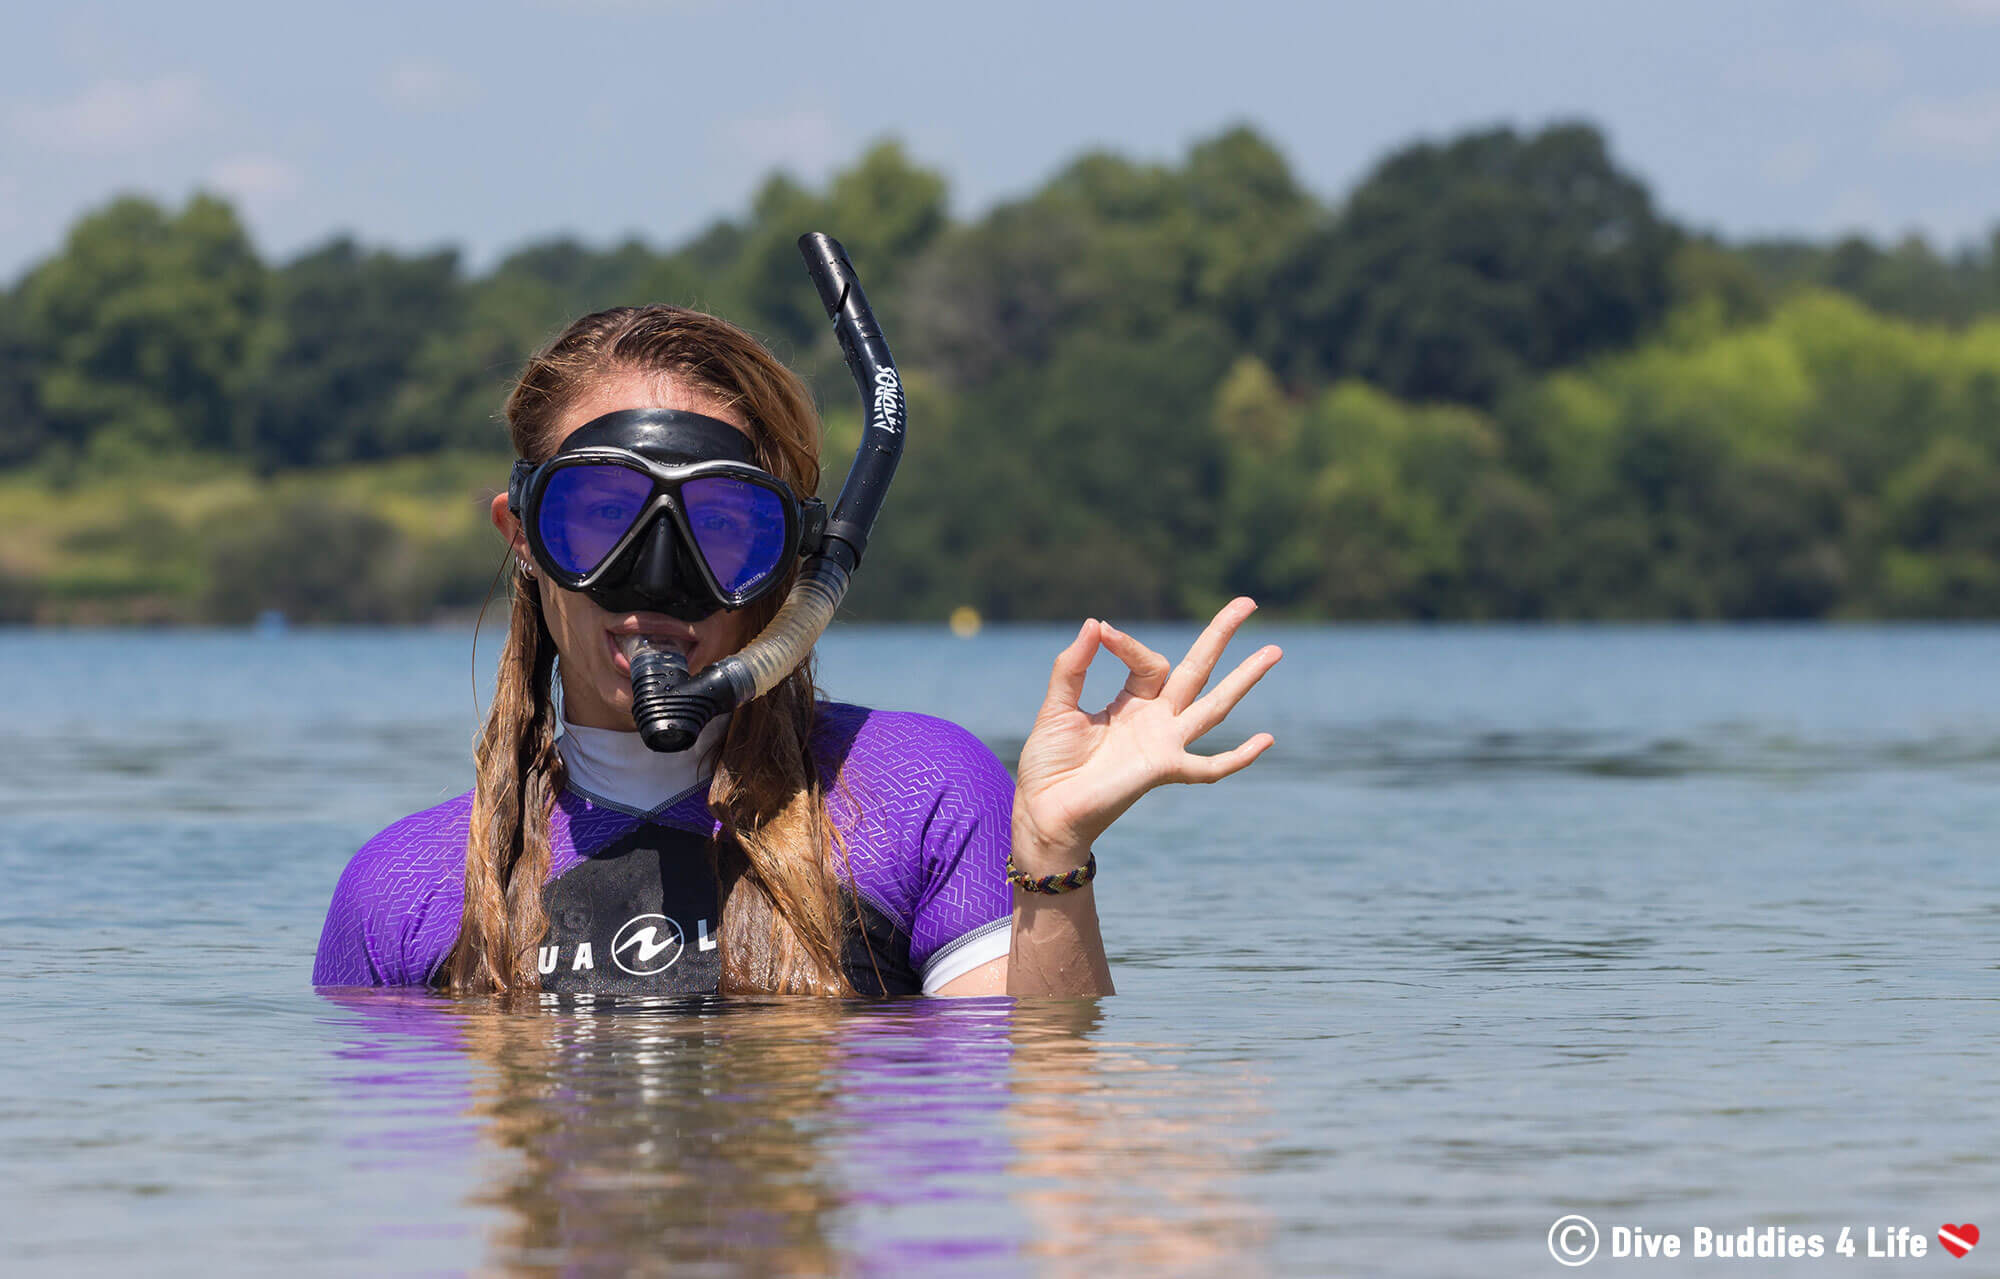 Female Diver Ali Giving The Ok Scuba Sign In The Water Ready to Go Scuba Diving